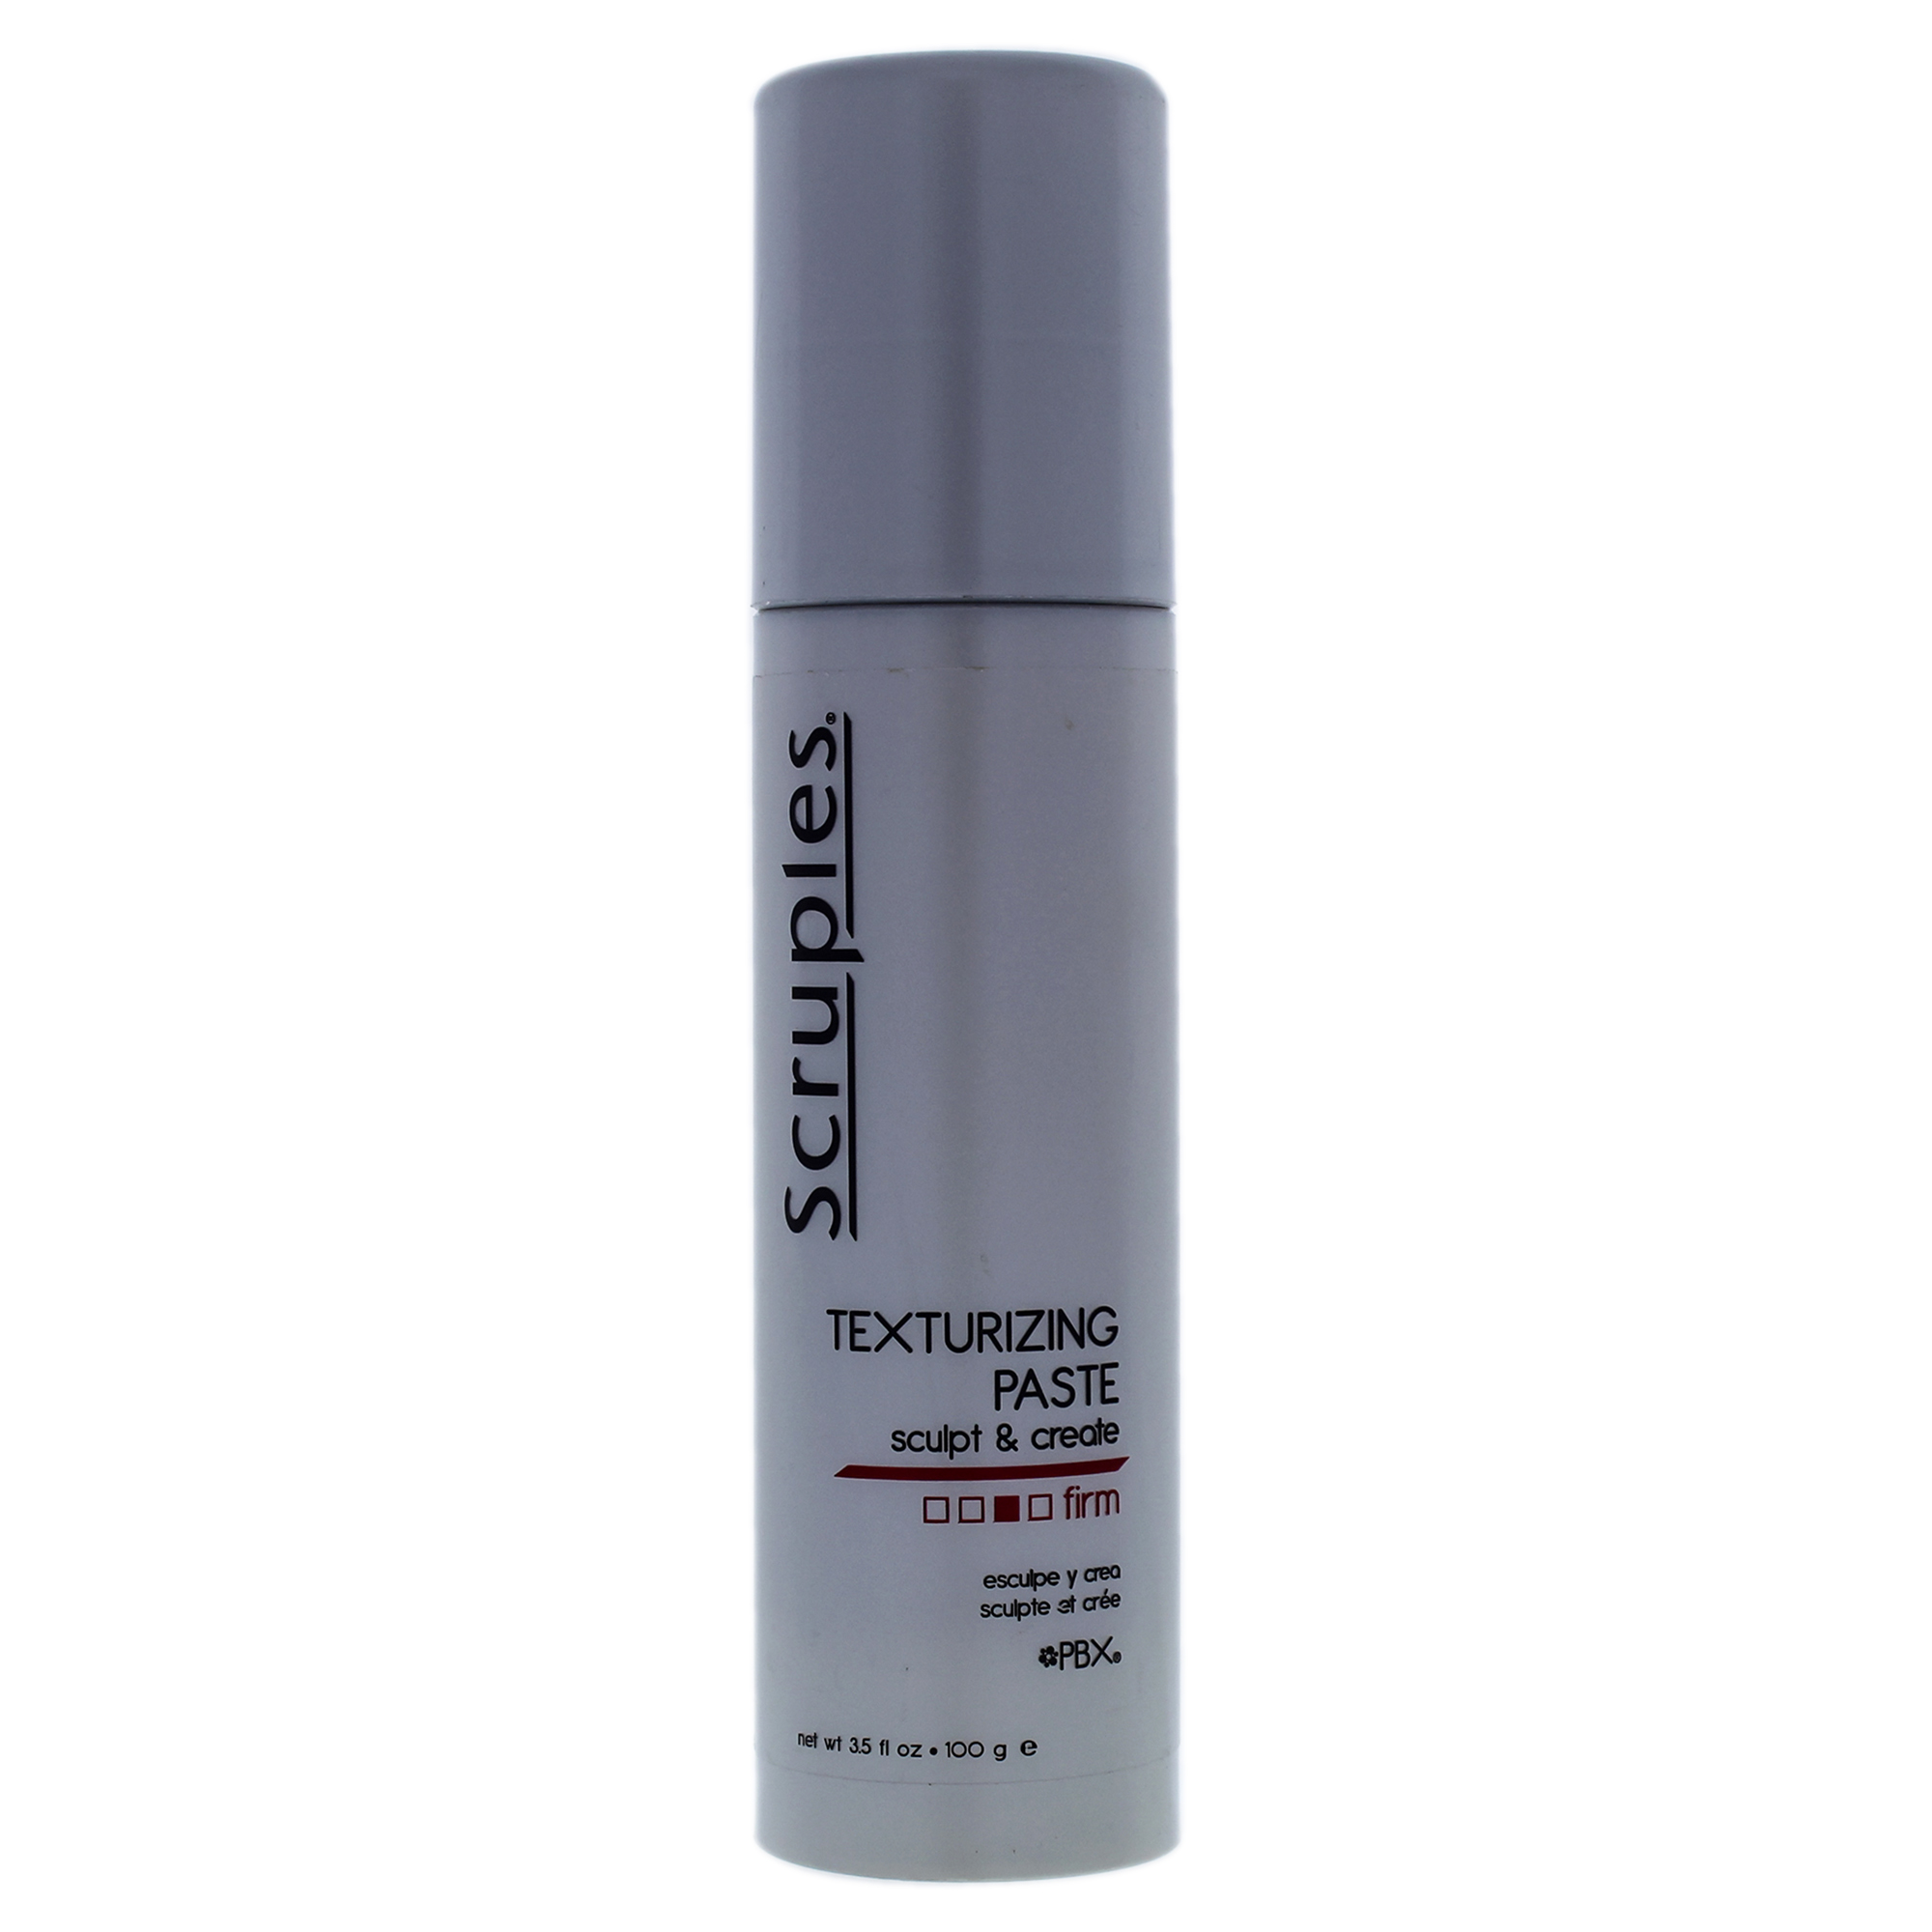 Scruples Hair Care Products (Hair Care:3.5oz Texturizing Paste;) - image 2 of 2